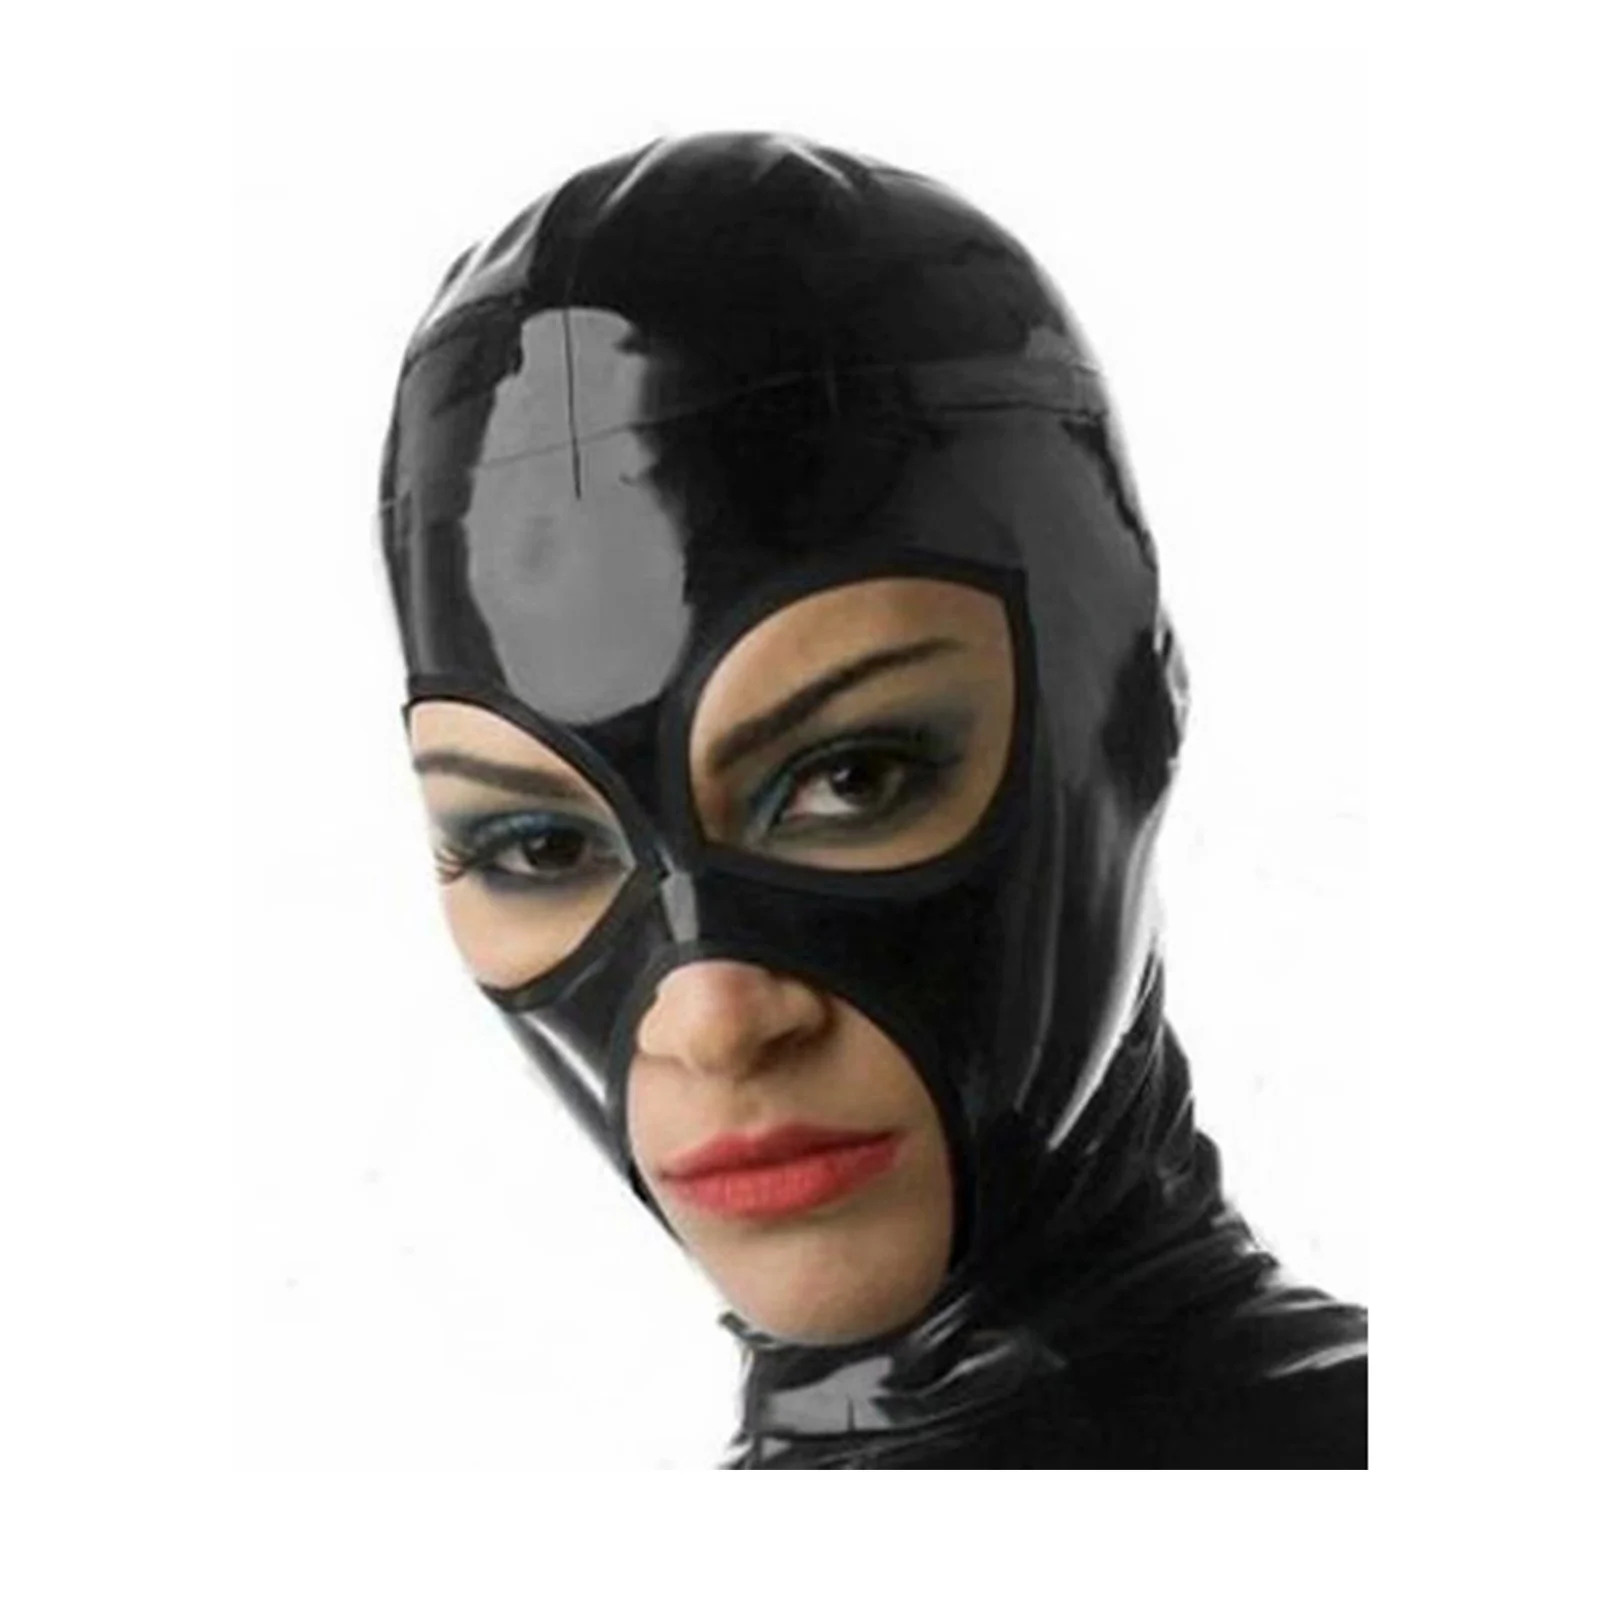 MONNIK Latex Mask Black Rubber Unisex Hood Open Eyes and Mouth Handmade for Latex Fetish Party Catsuit Halloween Clubwear 3k240g black football pattern carbon fiber cloth suitable for off road vehicle shell hood trunk rear throat and car modifica